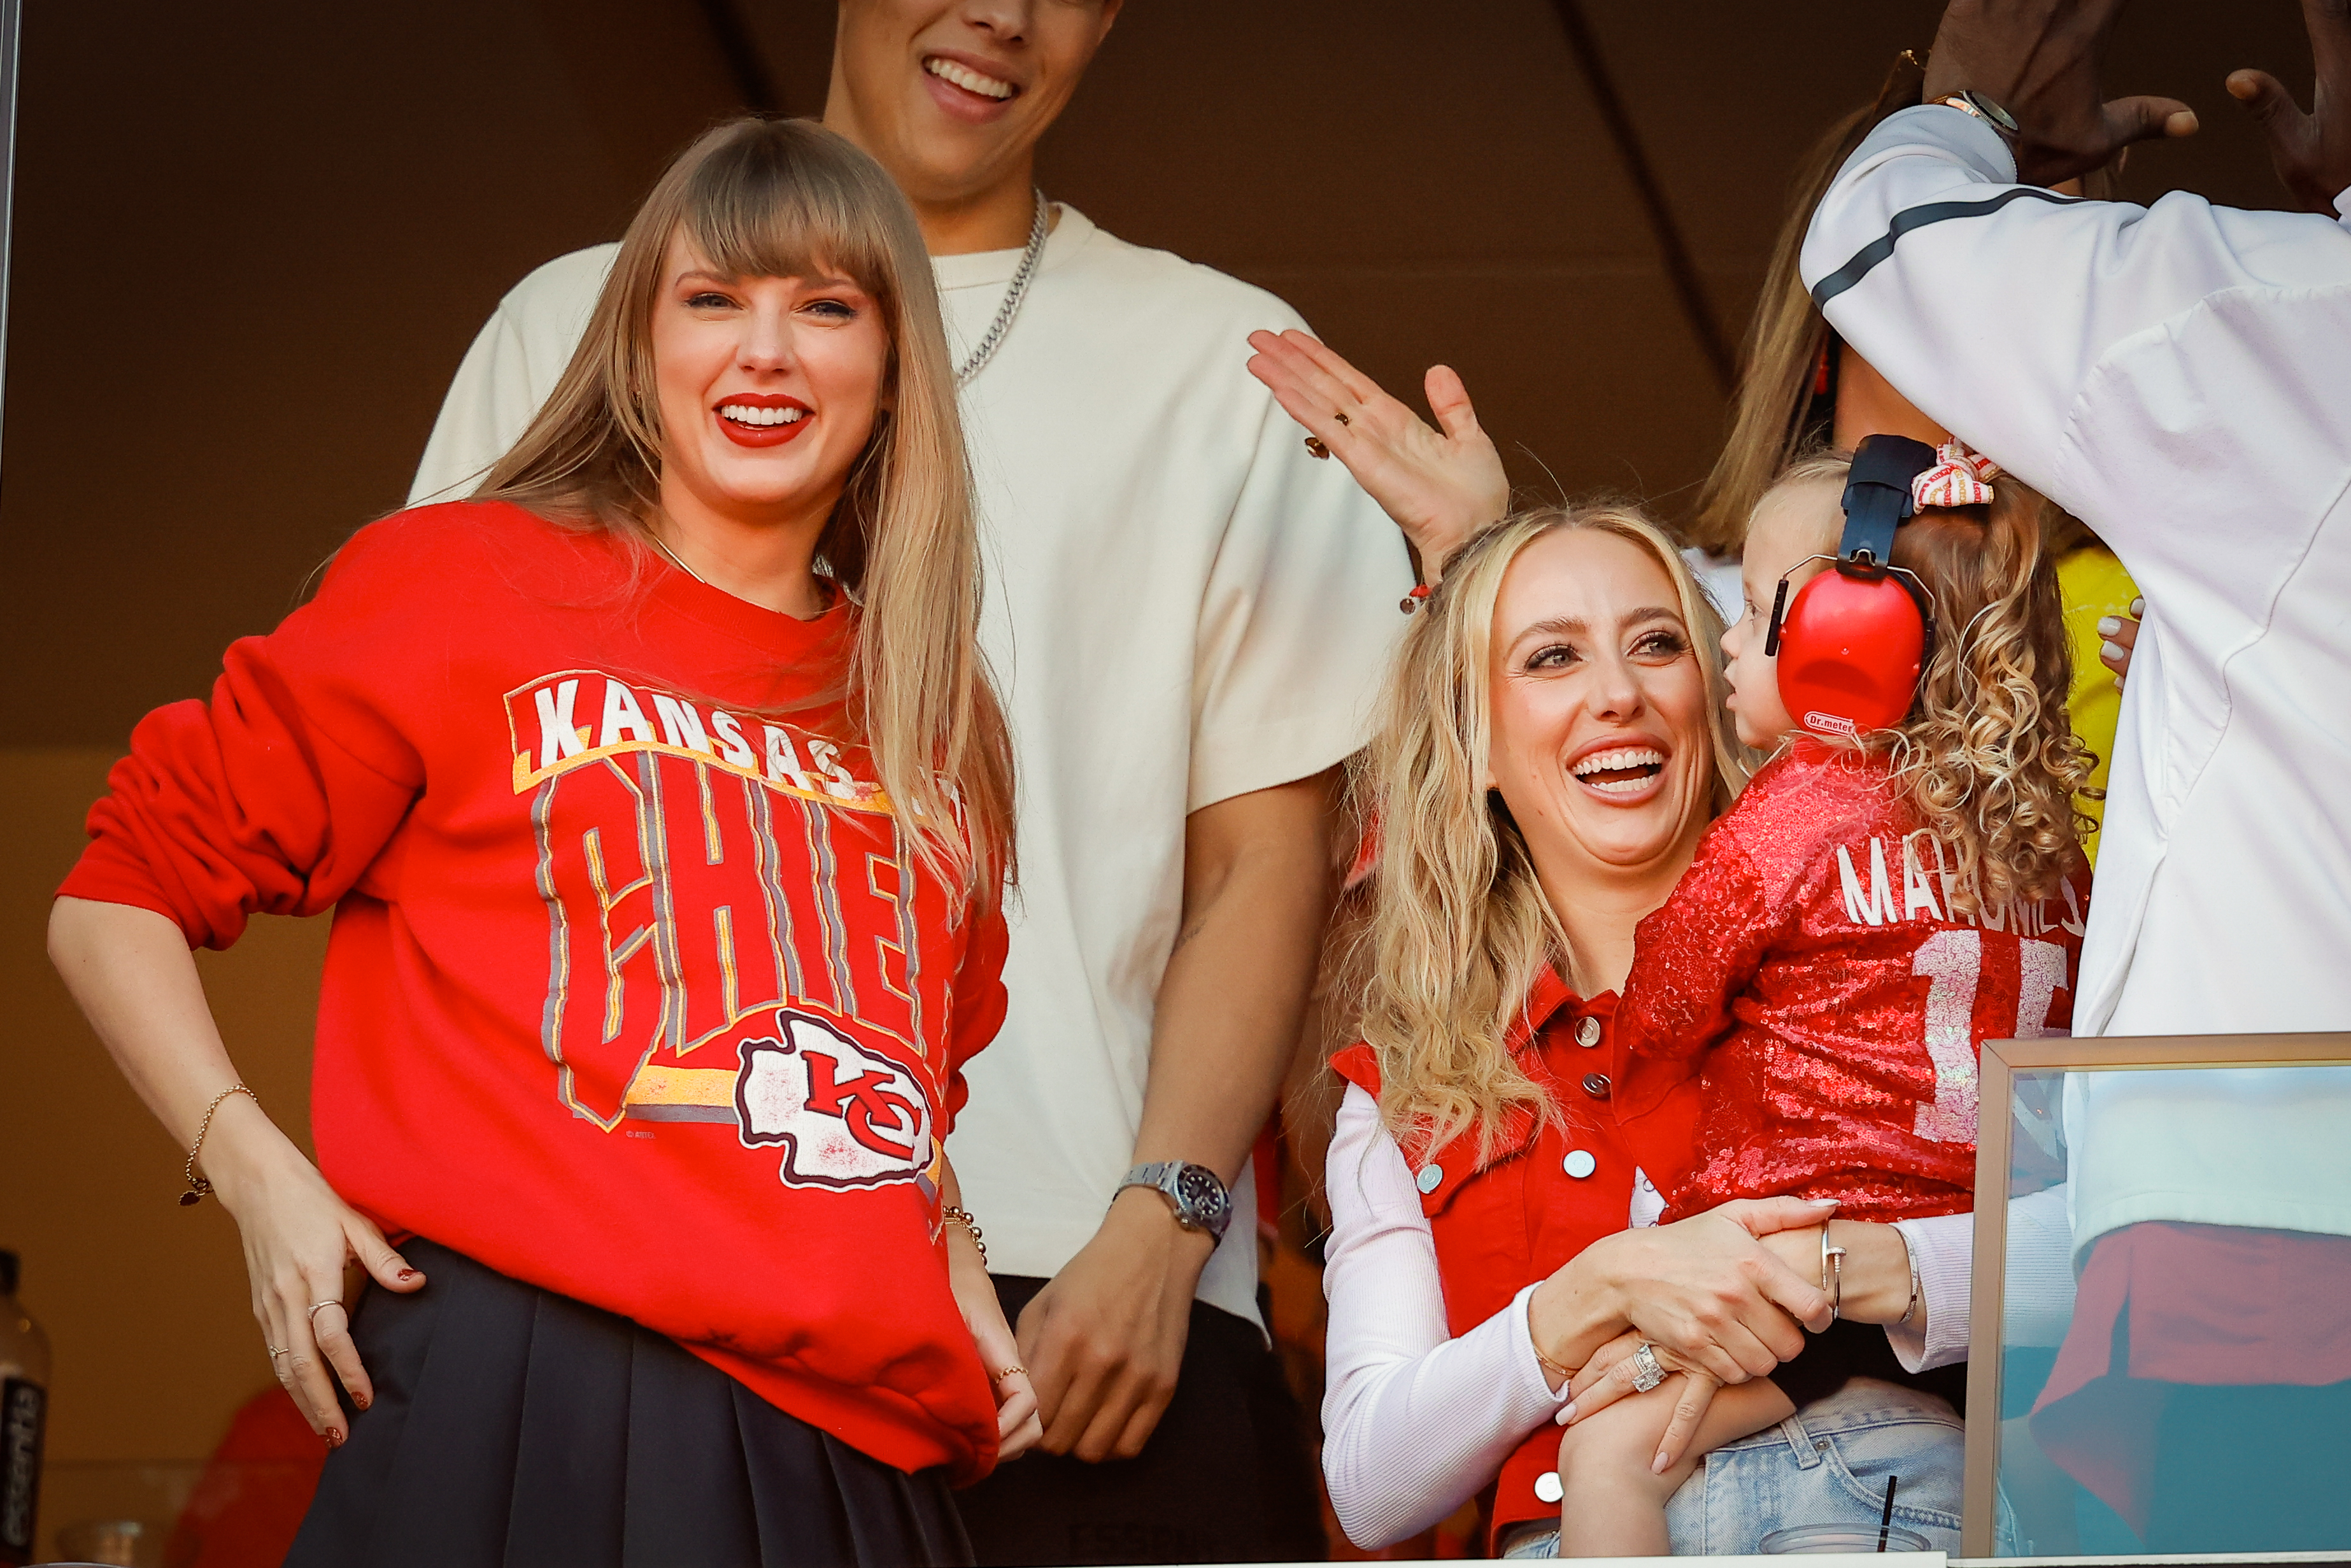 Taylor Swift and Brittany Mahomes in the crowd